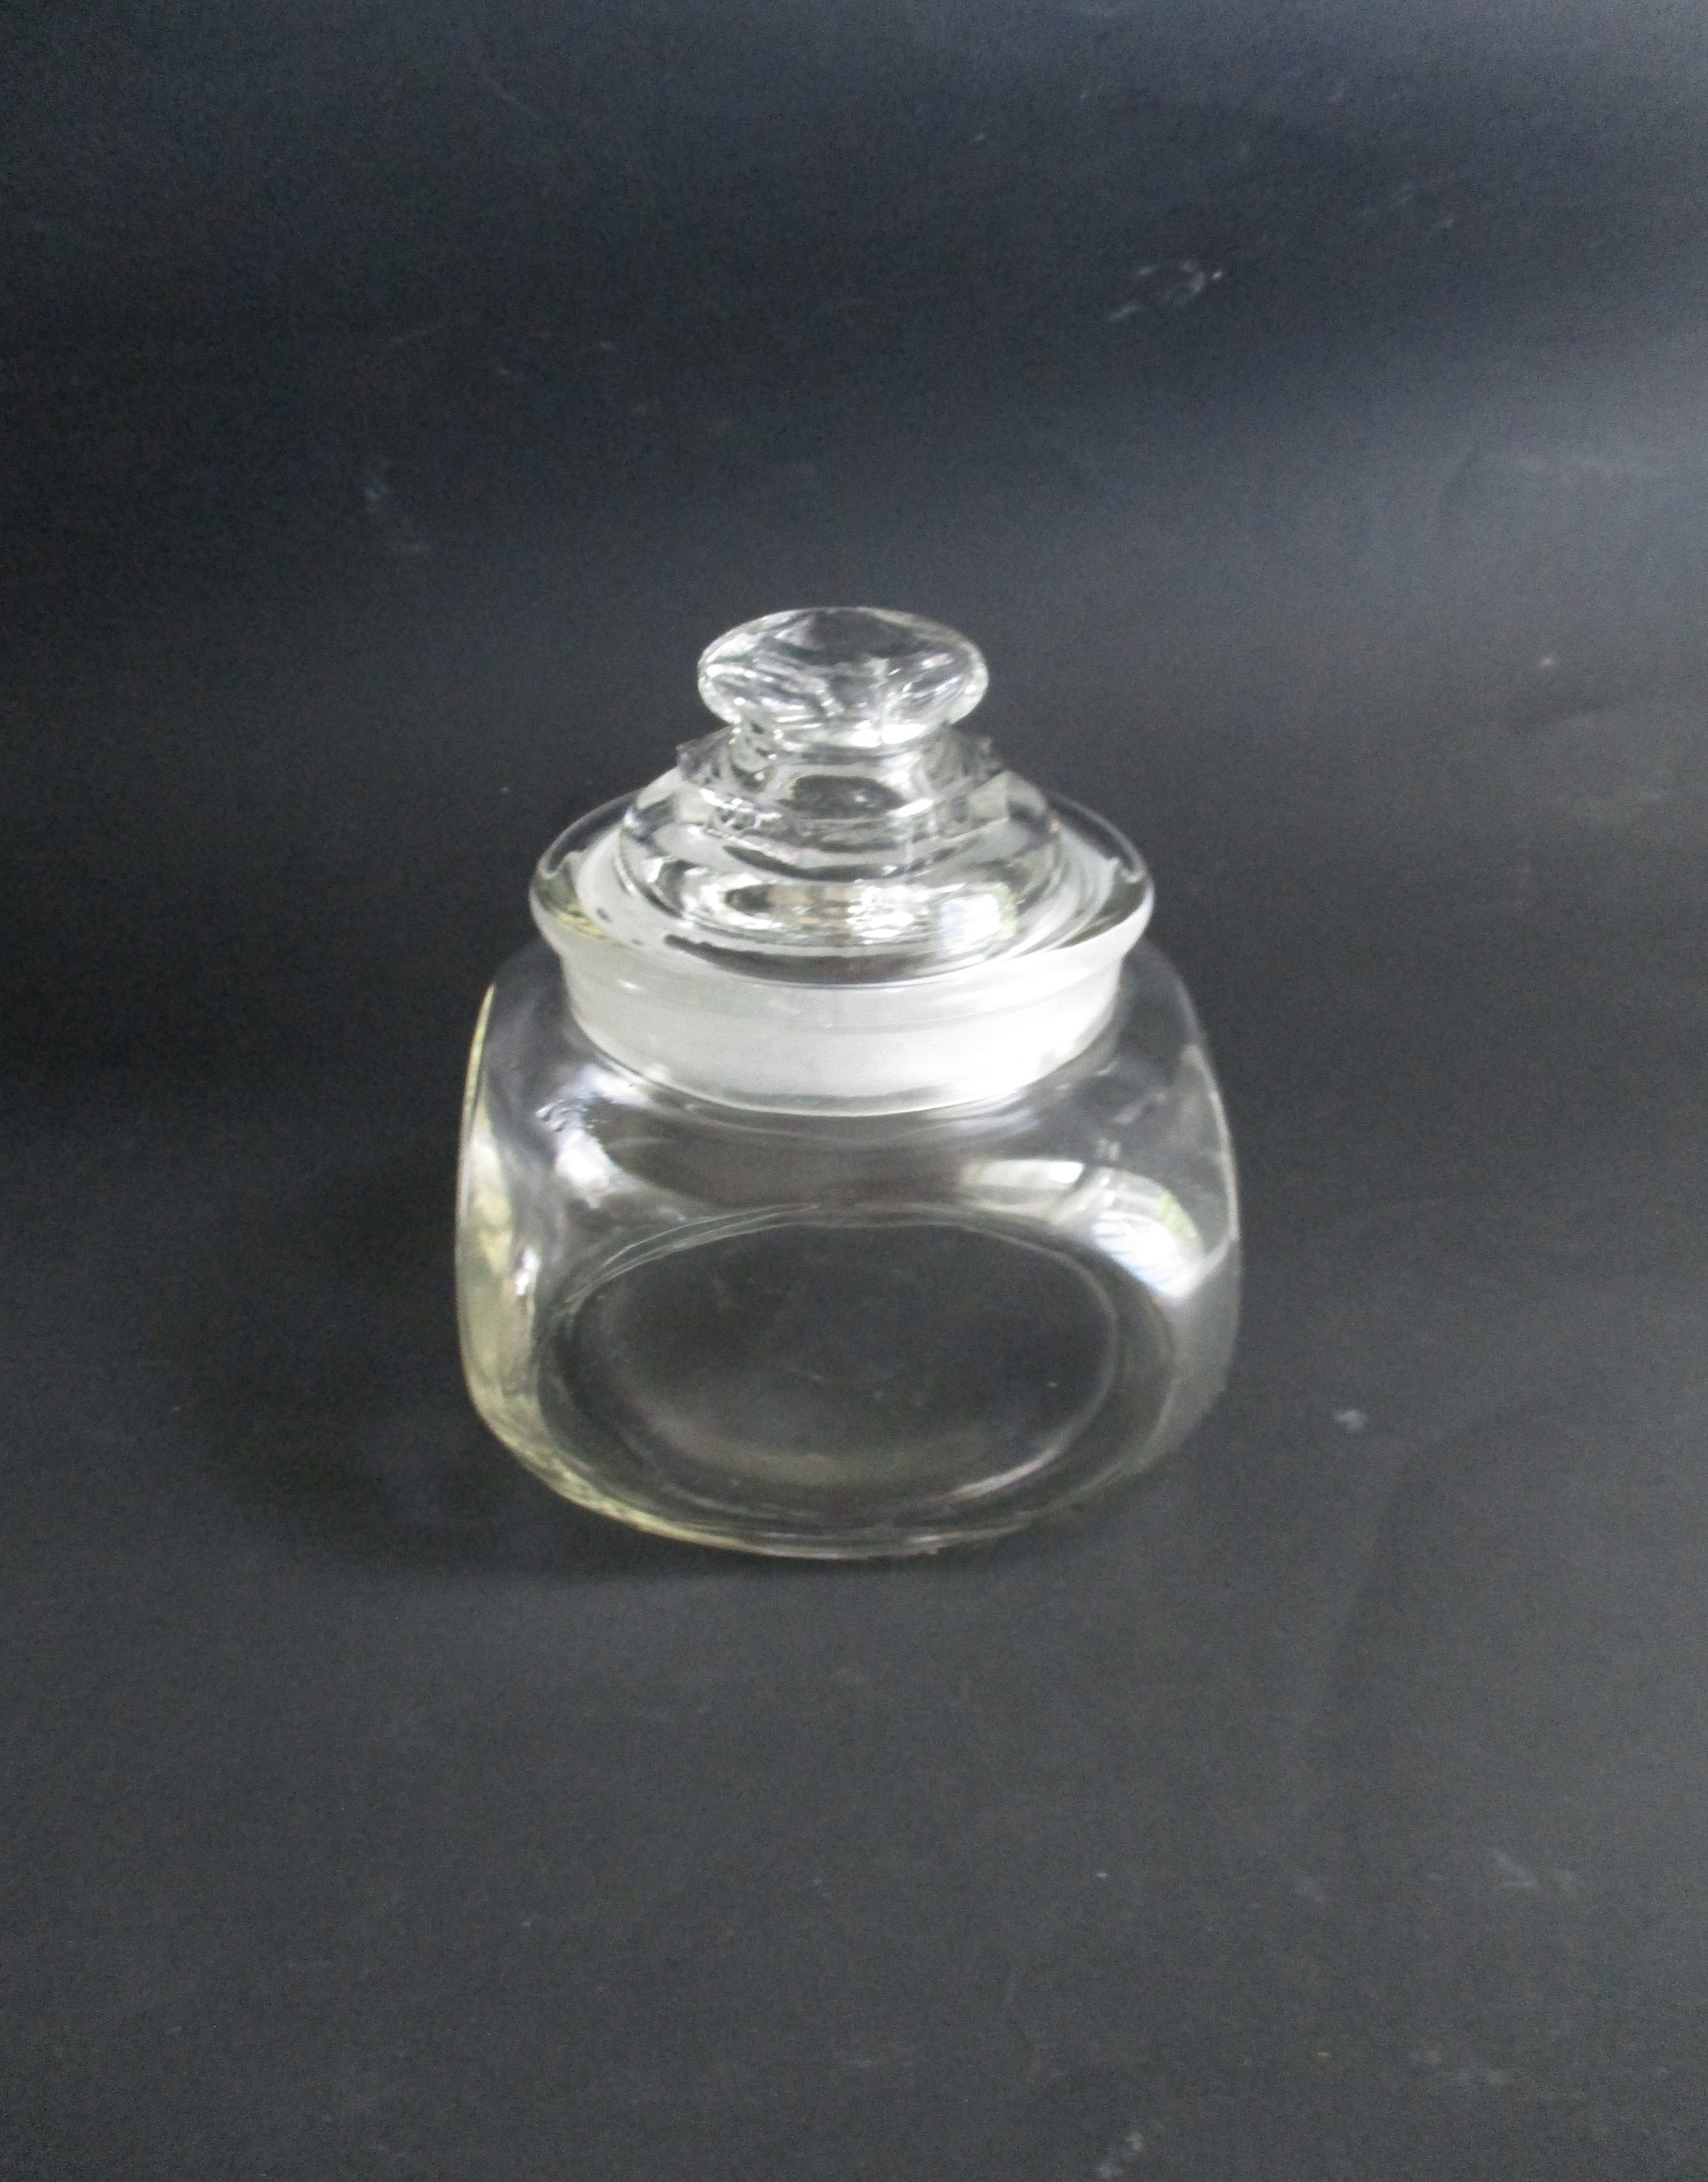 clear glass danube jar with knob lid for candle making